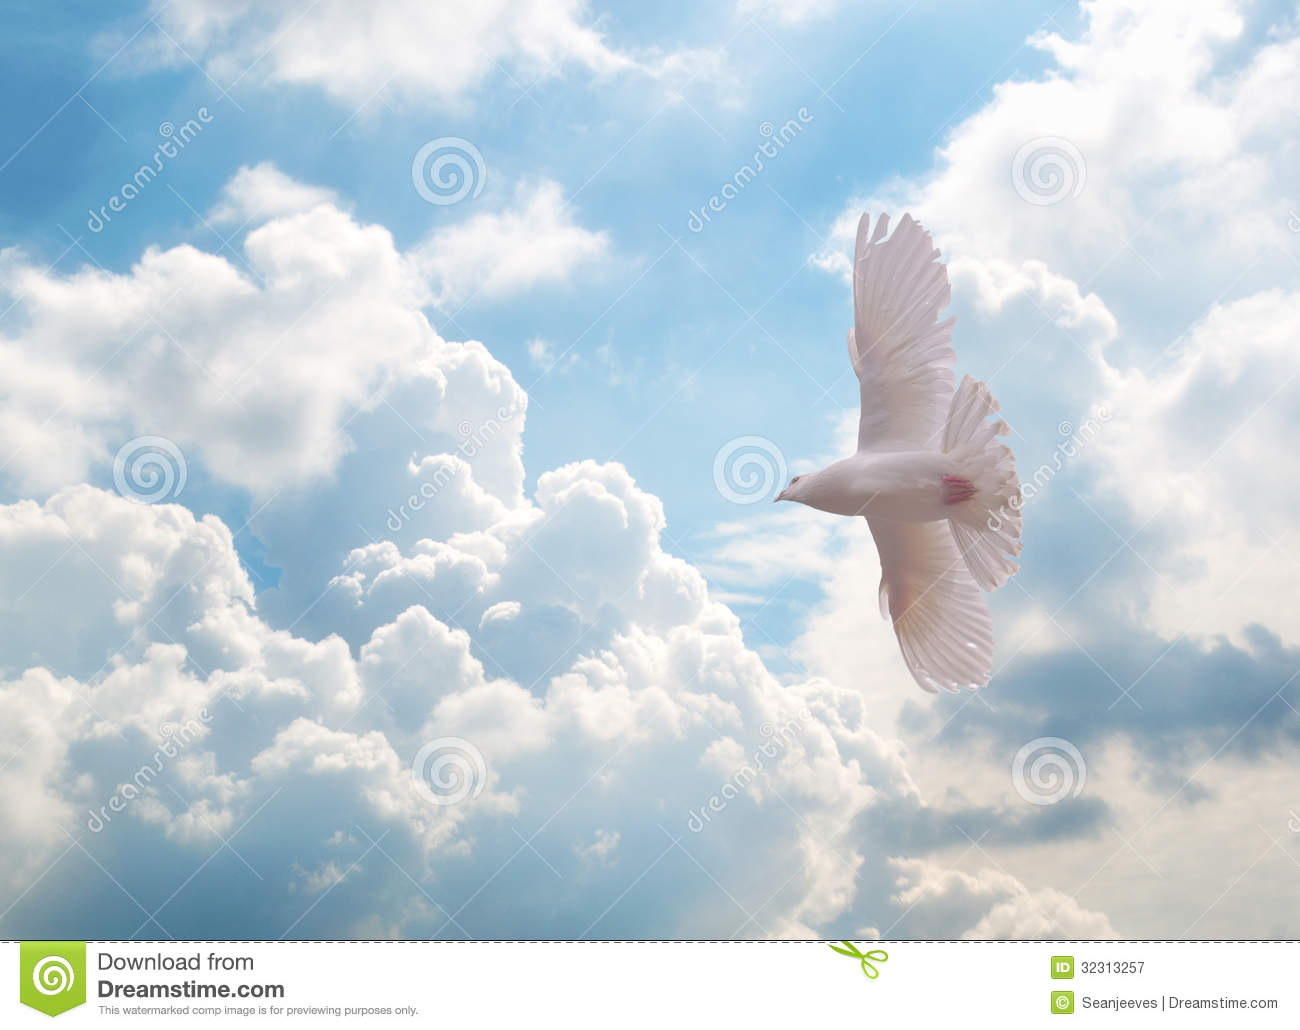 White Dove Royalty Free Stock Photography   Image  32313257